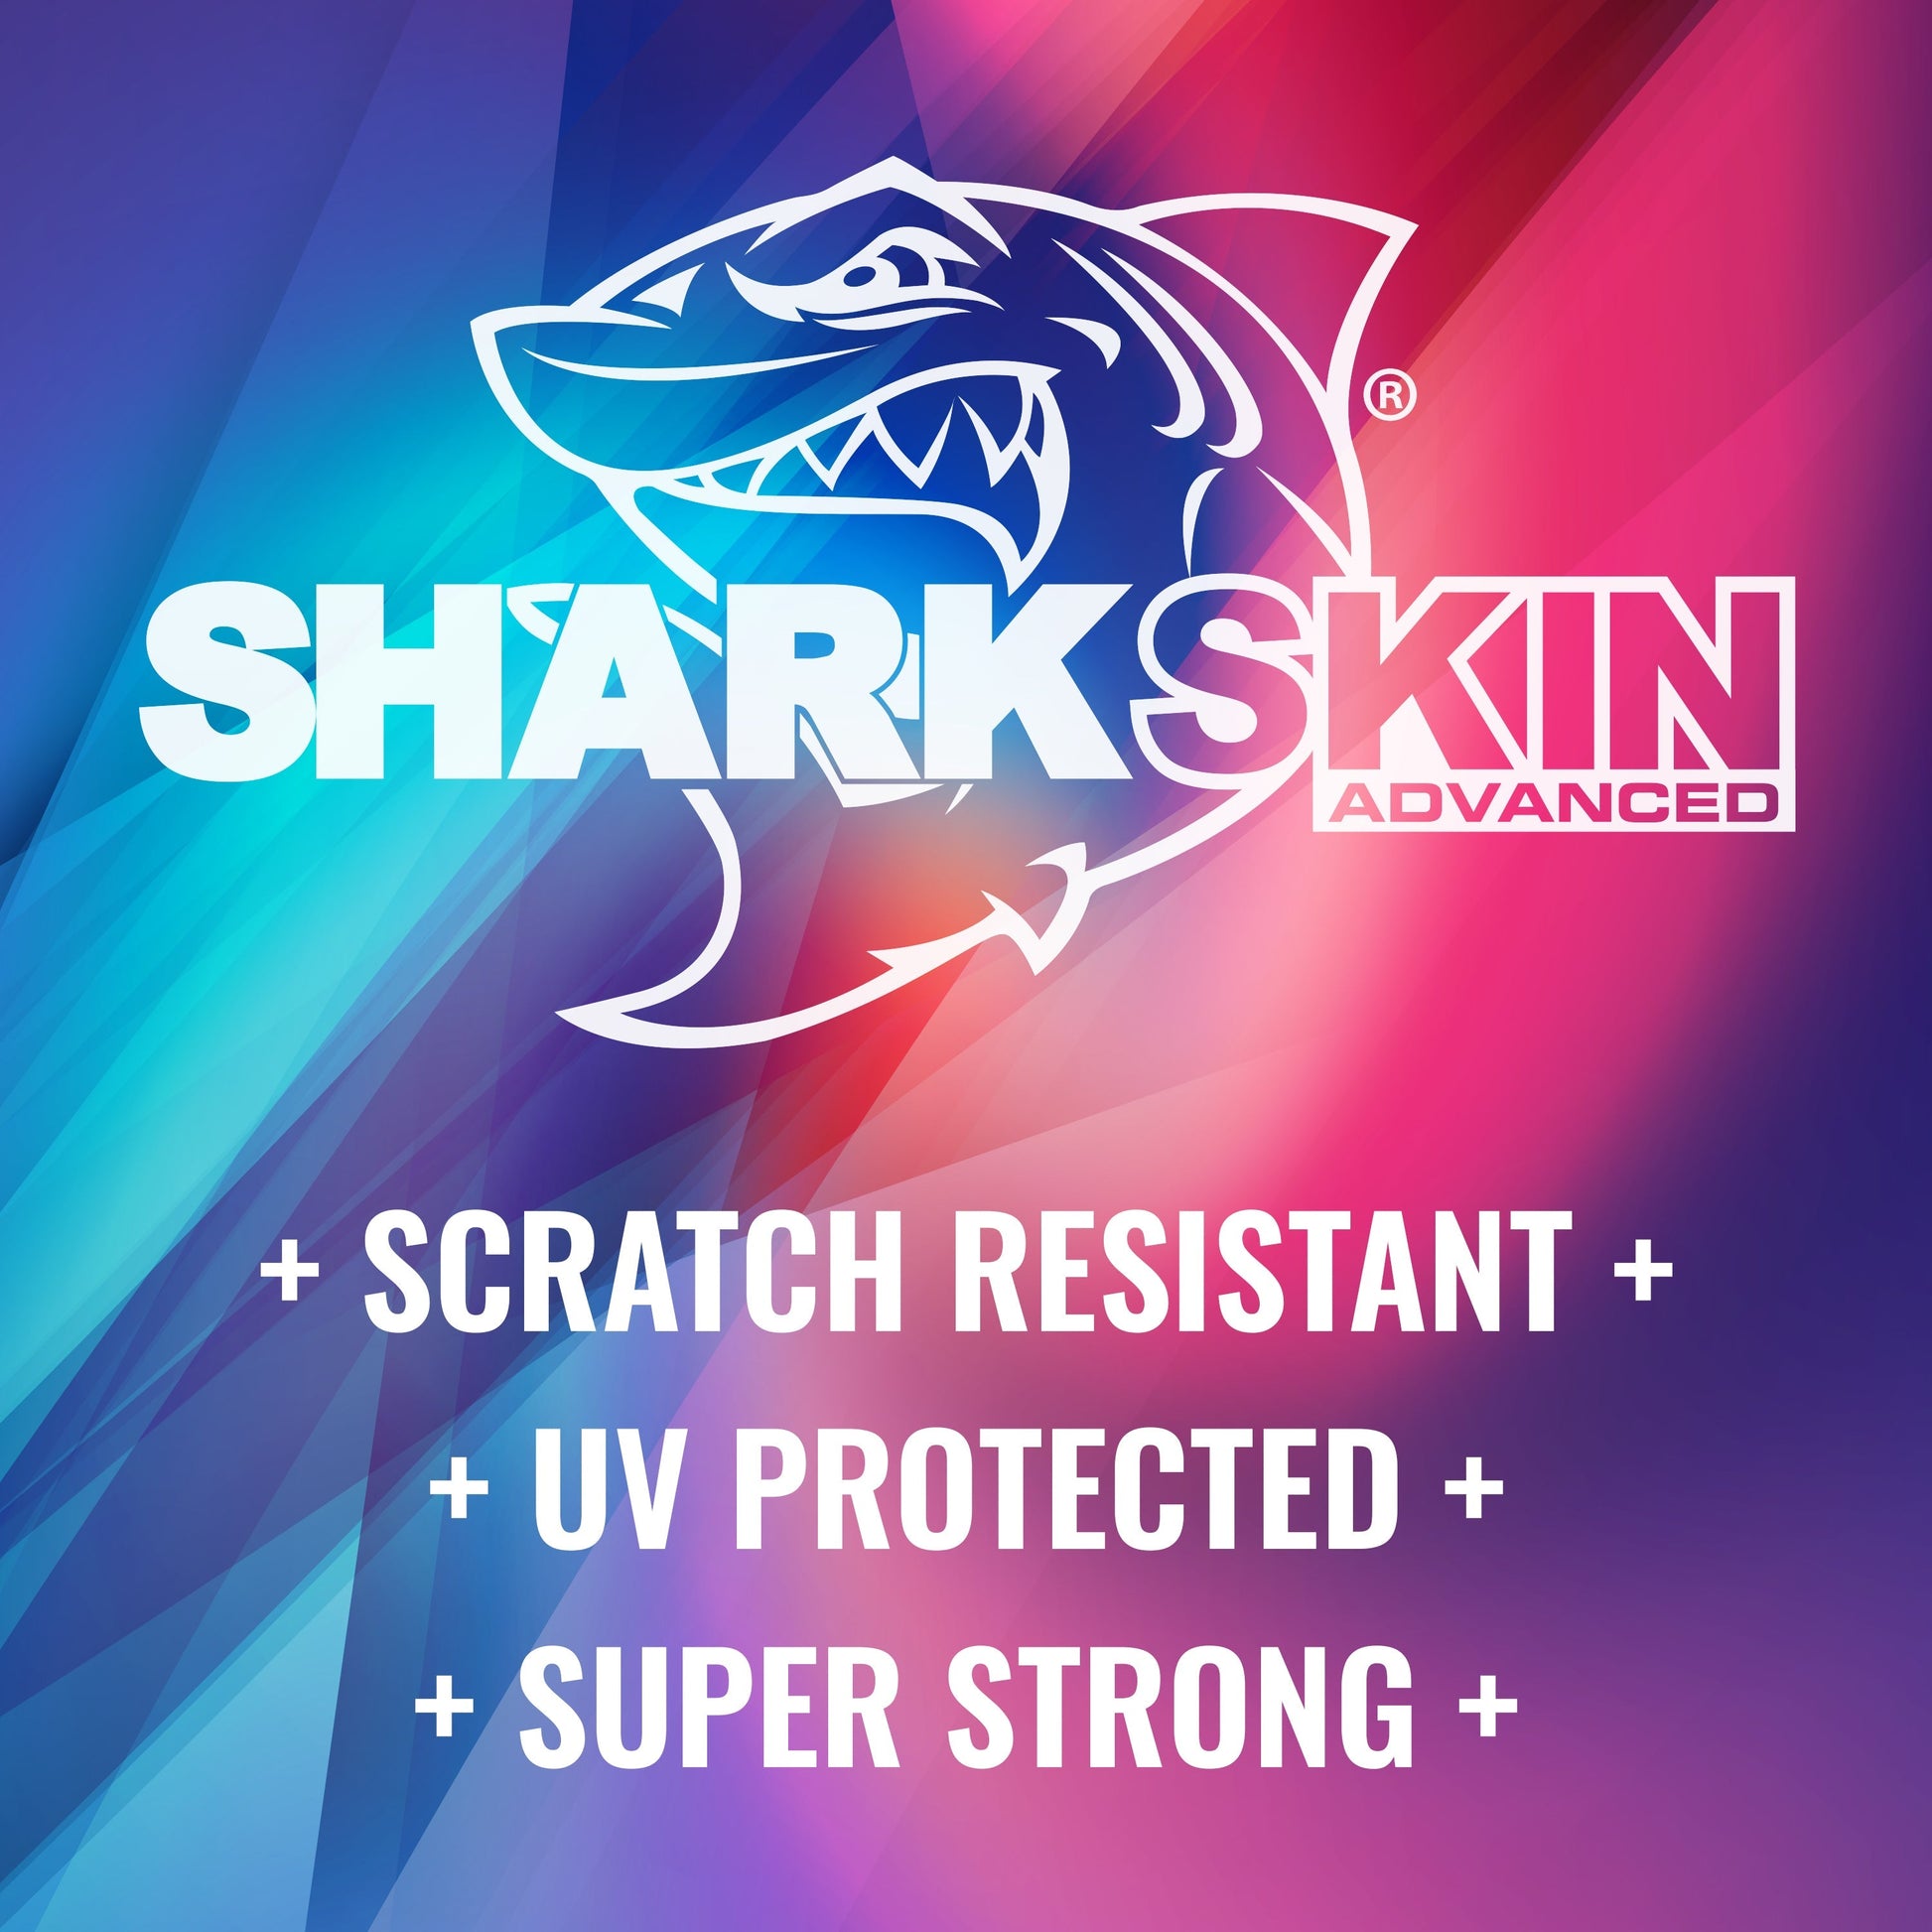 SharkSkin® material - Exclusive material known for its superior strength, durability, and long-lasting performance.